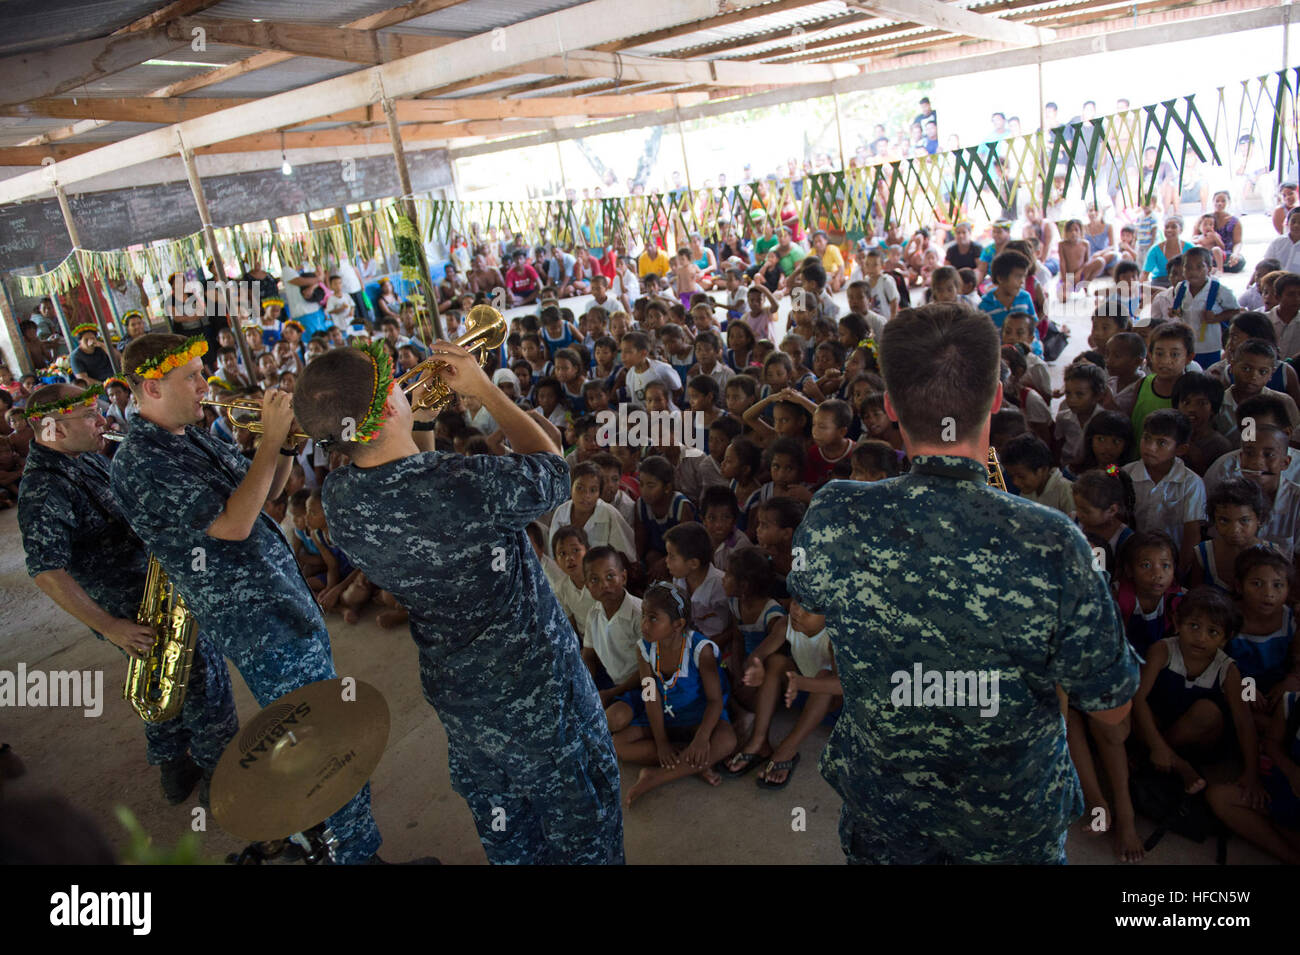 130718-N-WD757-515 TARAWA, Kiribati (July 18, 2013) The U.S. Navy Pacific Fleet Band perform for students at St. John Bosco Taaken Bairiki Primary School during a community service project during Pacific Partnership 2013. Working at the invitation of each host nation, U.S. Navy forces are joined by non-governmental organizations and regional partners that include Australia, Canada, Colombia, France, Japan, Malaysia, Singapore, South Korea, and New Zealand to improve maritime security, conduct humanitarian assistance and strengthen disaster-response preparedness. (U.S. Navy photo by Mass Commun Stock Photo